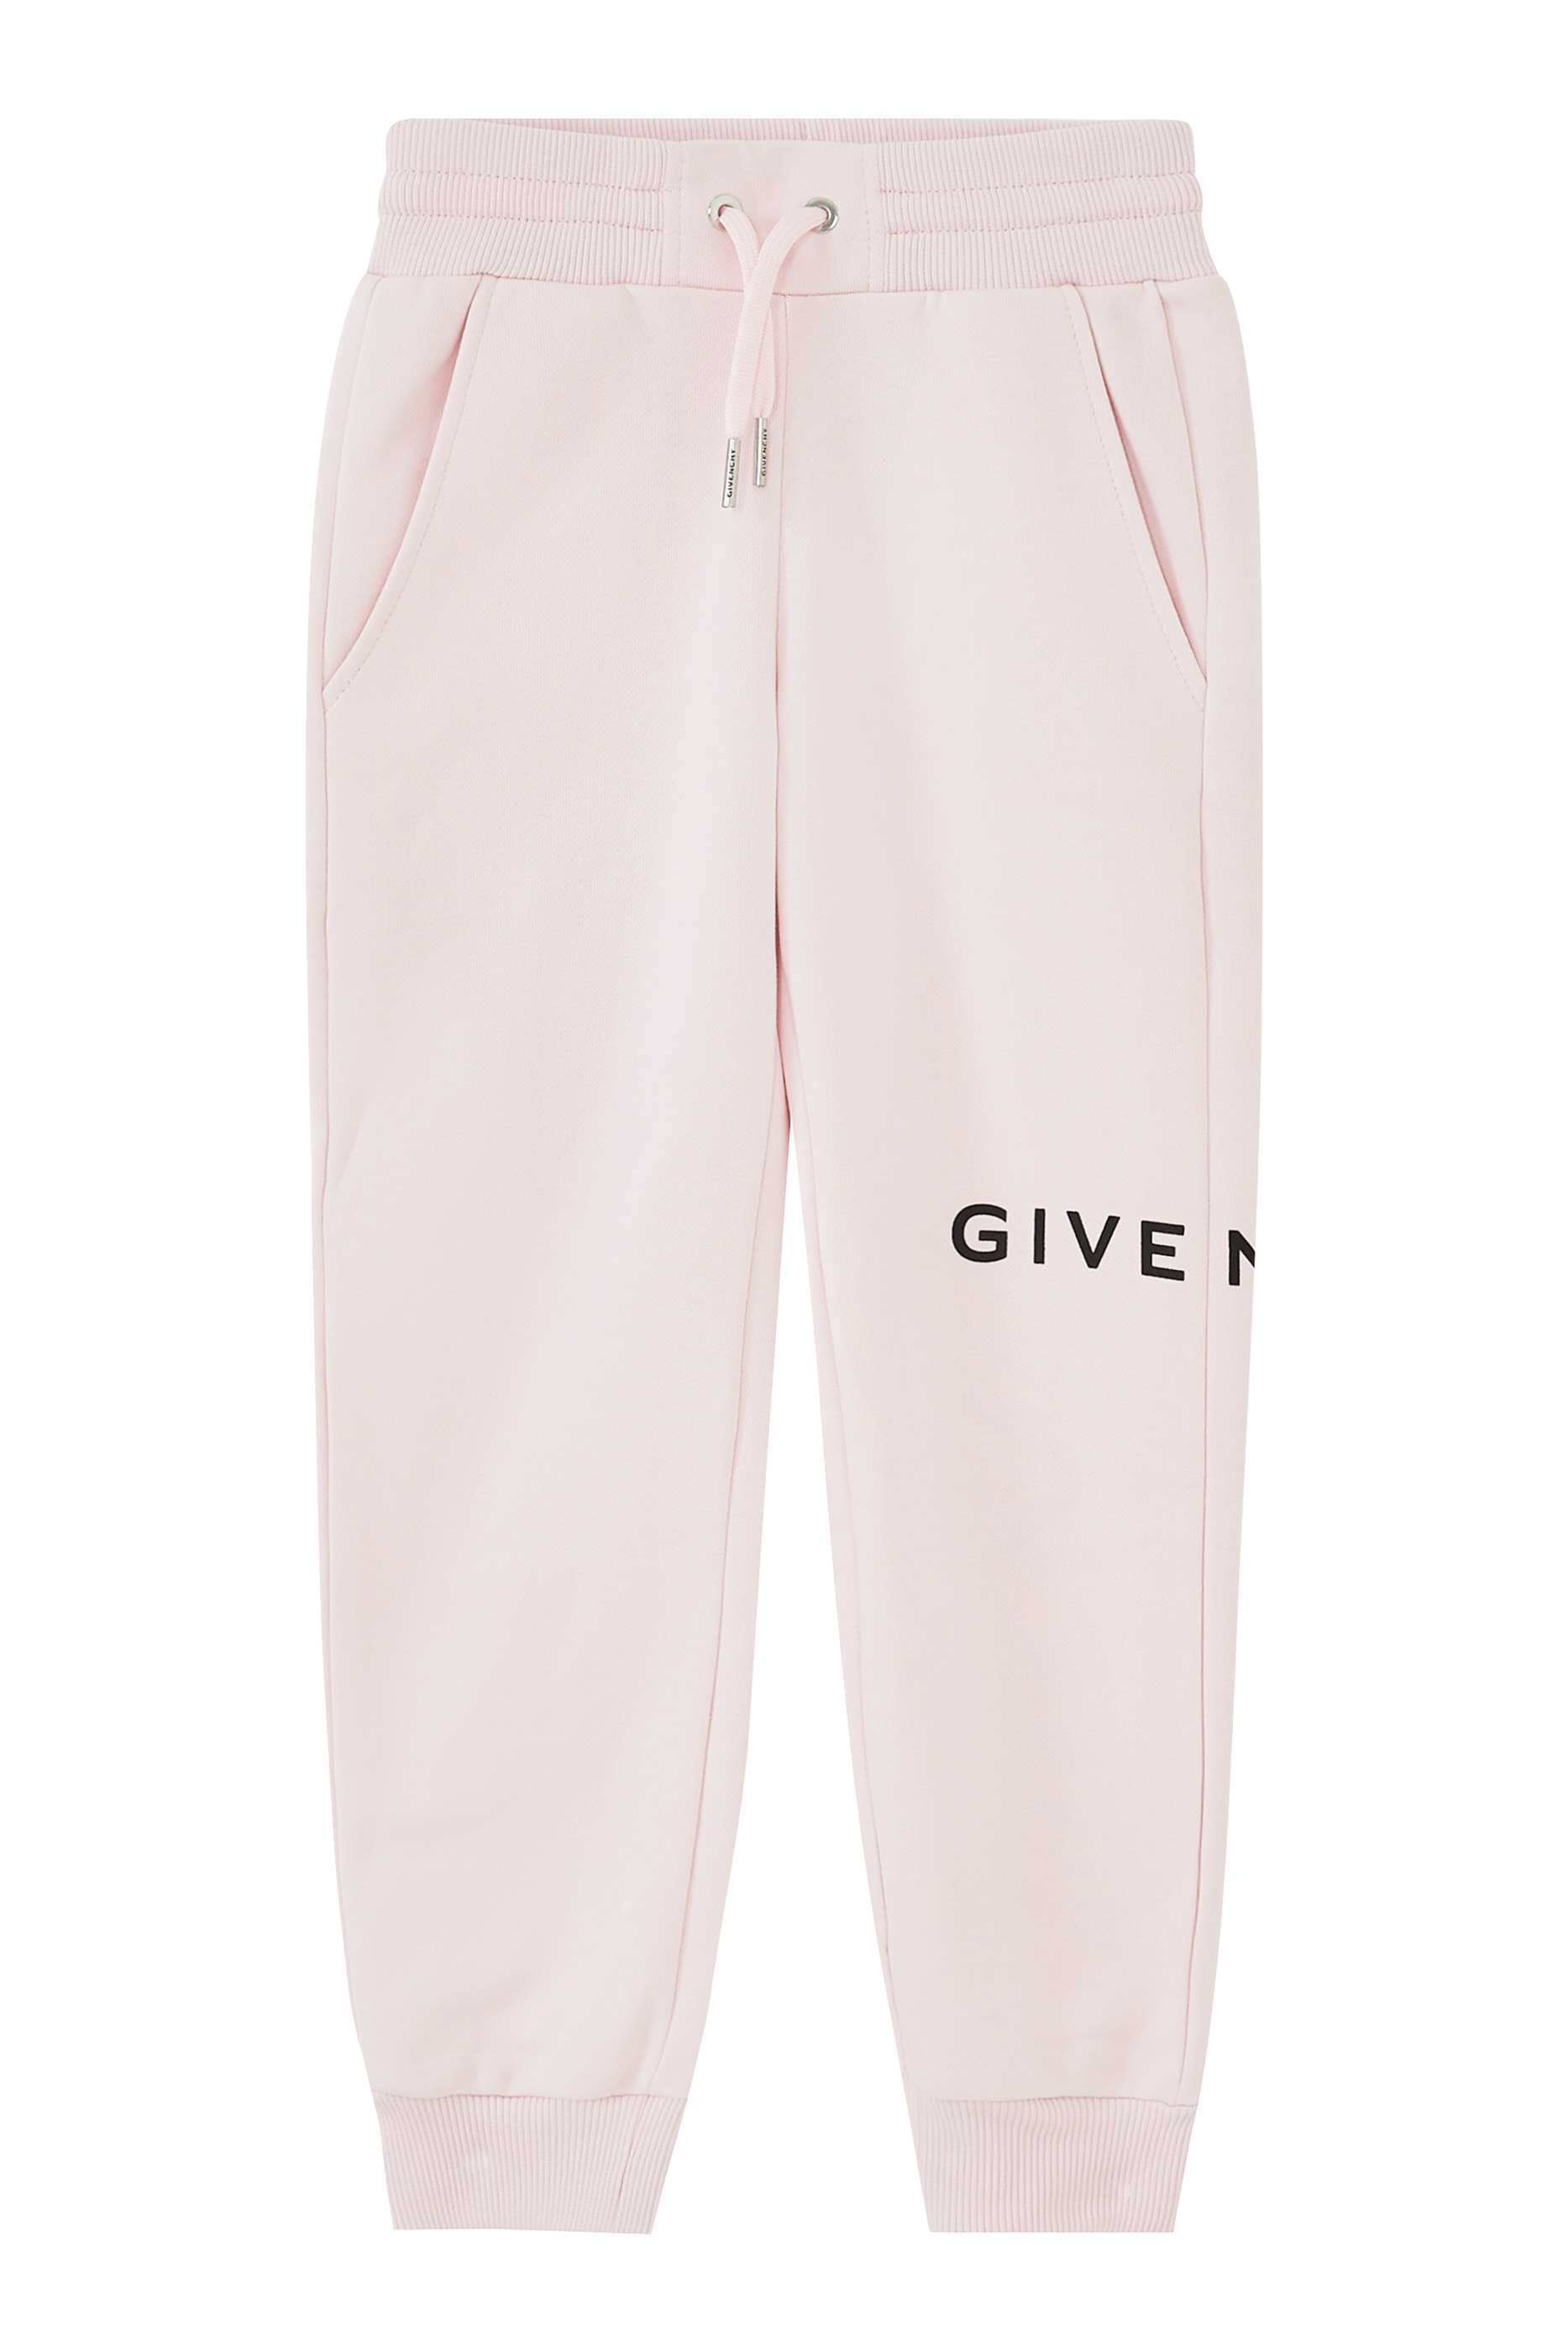 Givenchy track pants – DailyLuxe